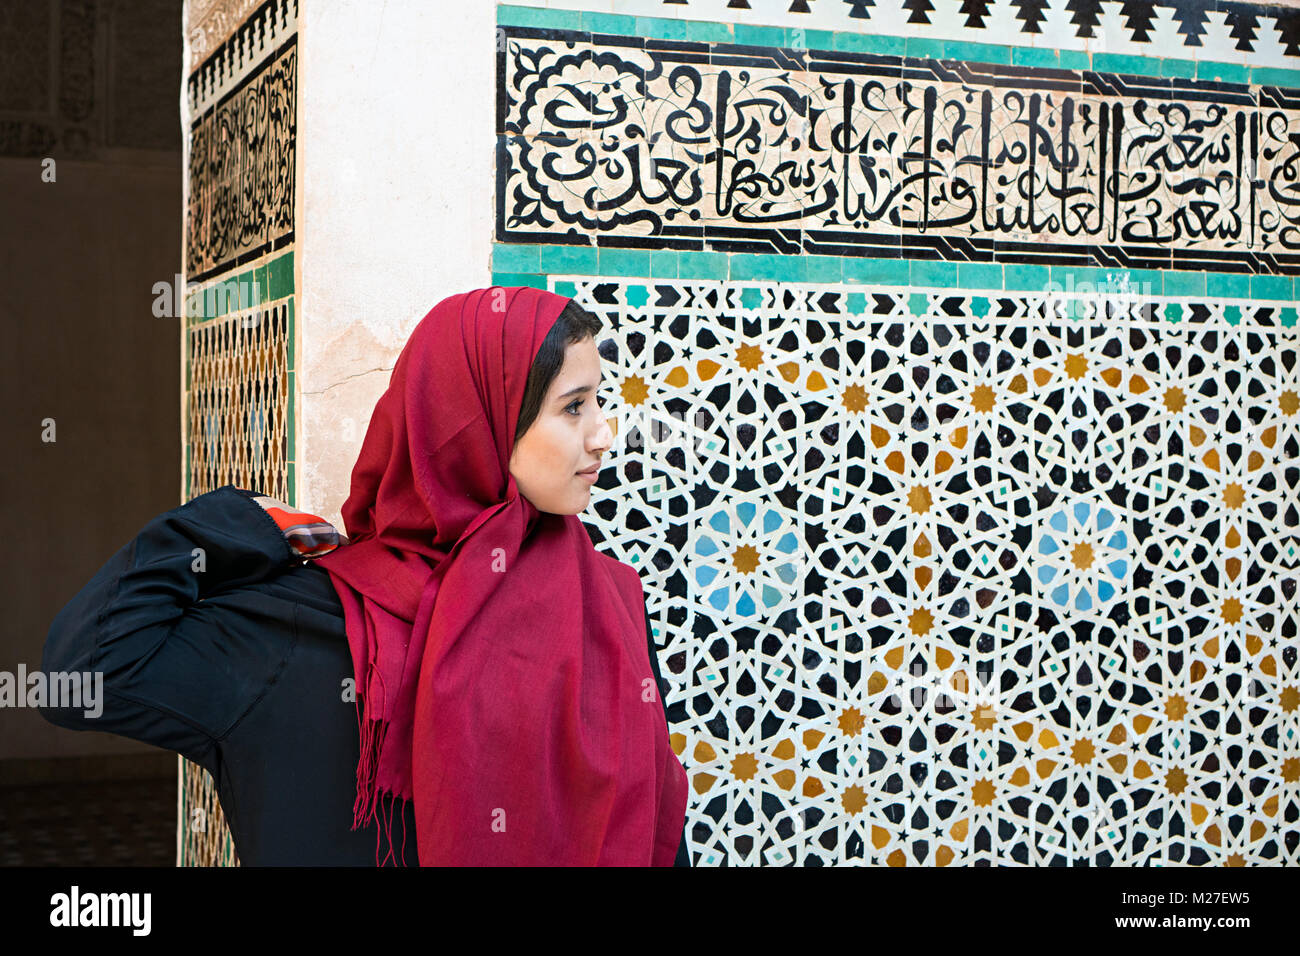 Arab woman in traditional clothing with red hijab in front of a wall with text from Koran Stock Photo